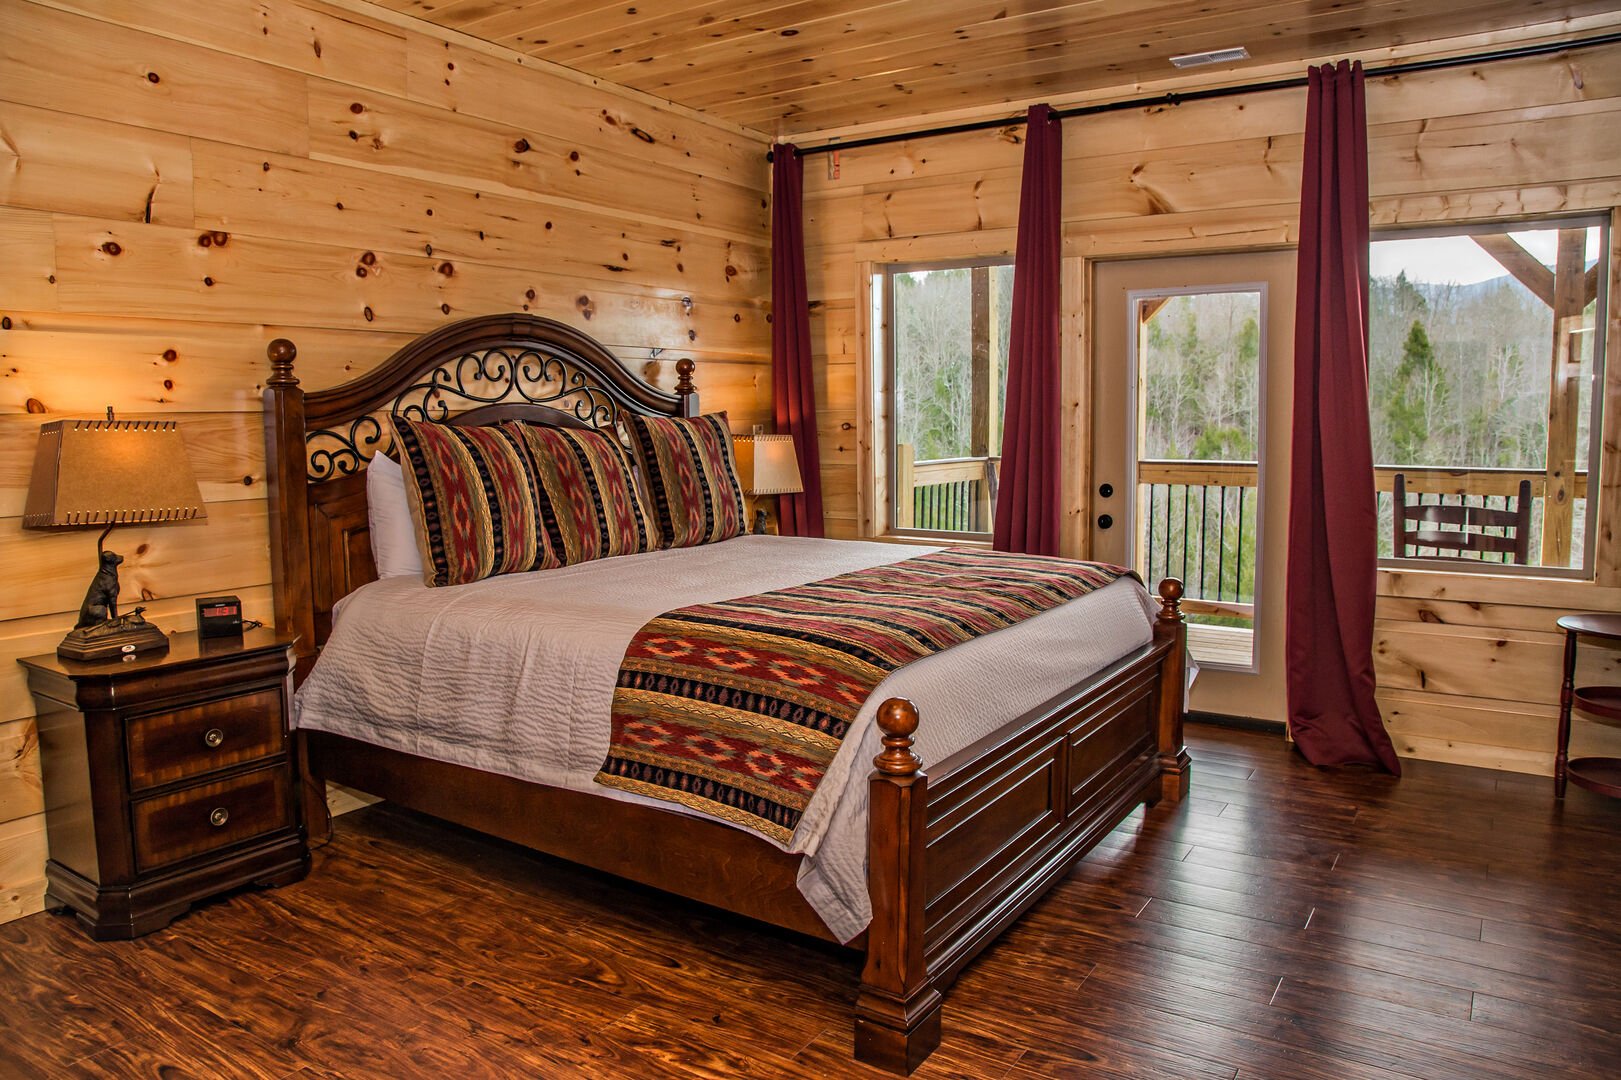 Large Wooden Bed in Bedroom.